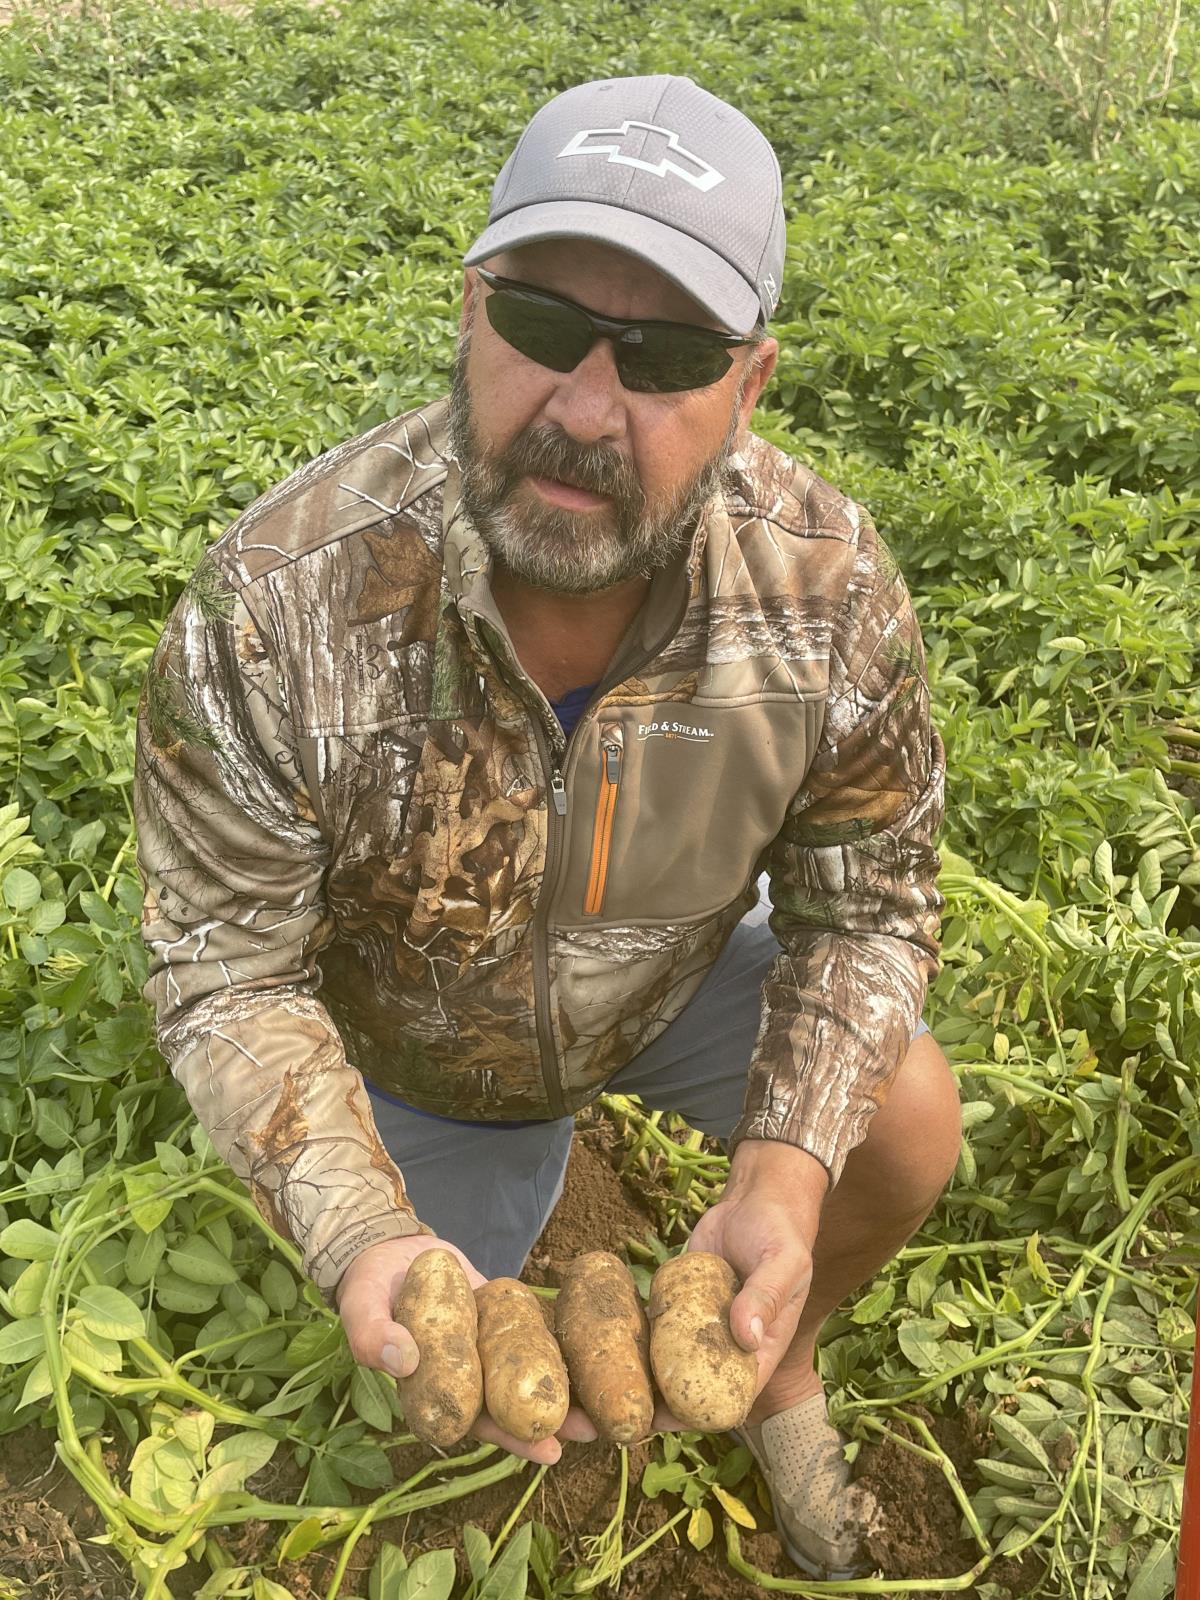 American Falls farmer Jim Tiede holds up Ranger Russet spuds from one of his fields on Aug. 24.